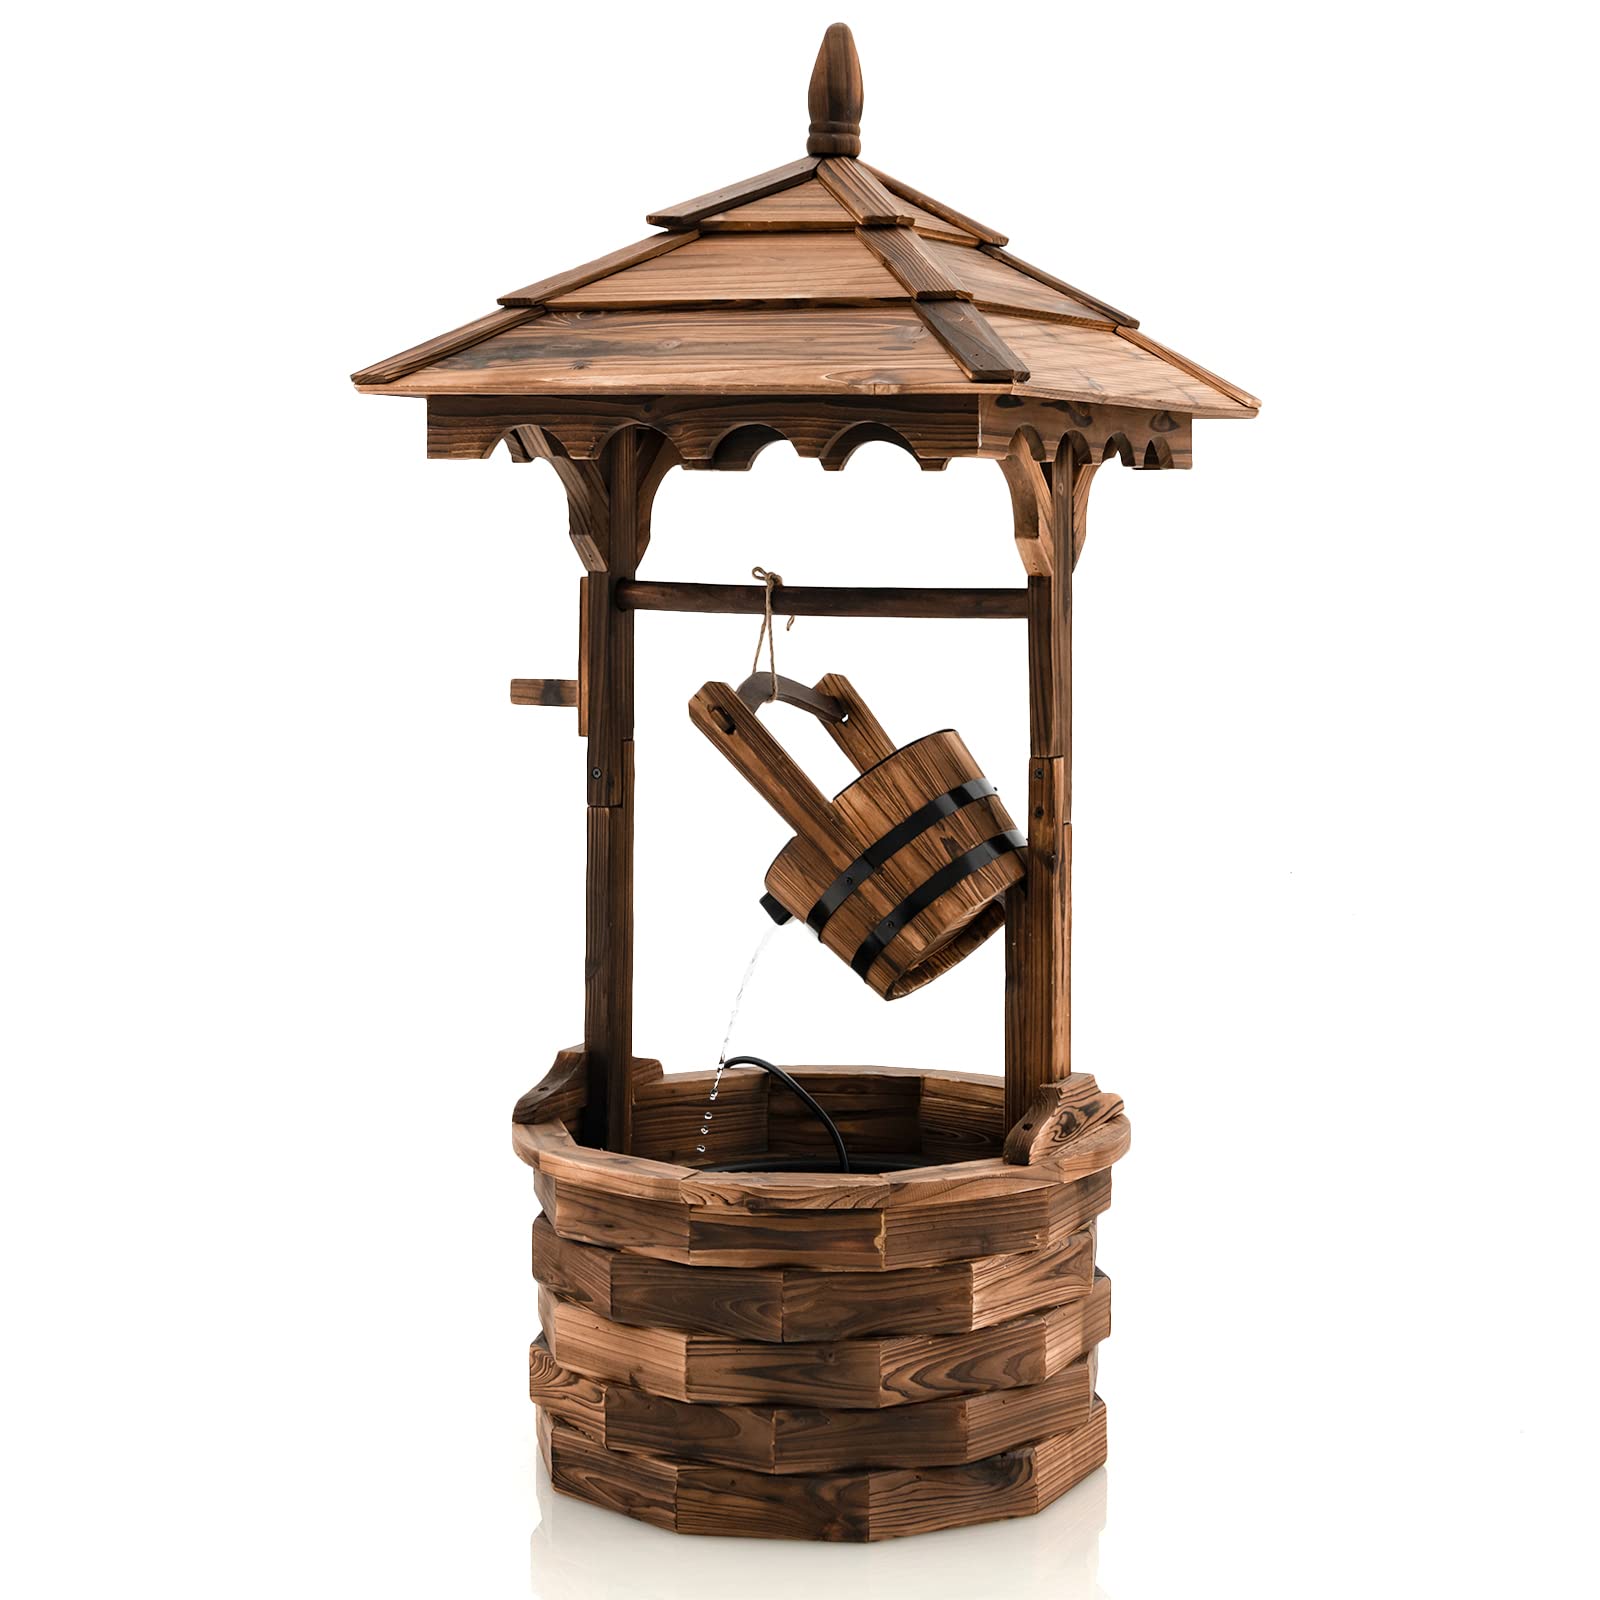 Giantex Rustic Wishing Well Fountain, Outdoor Wooden Water Fountain with Electric Pump